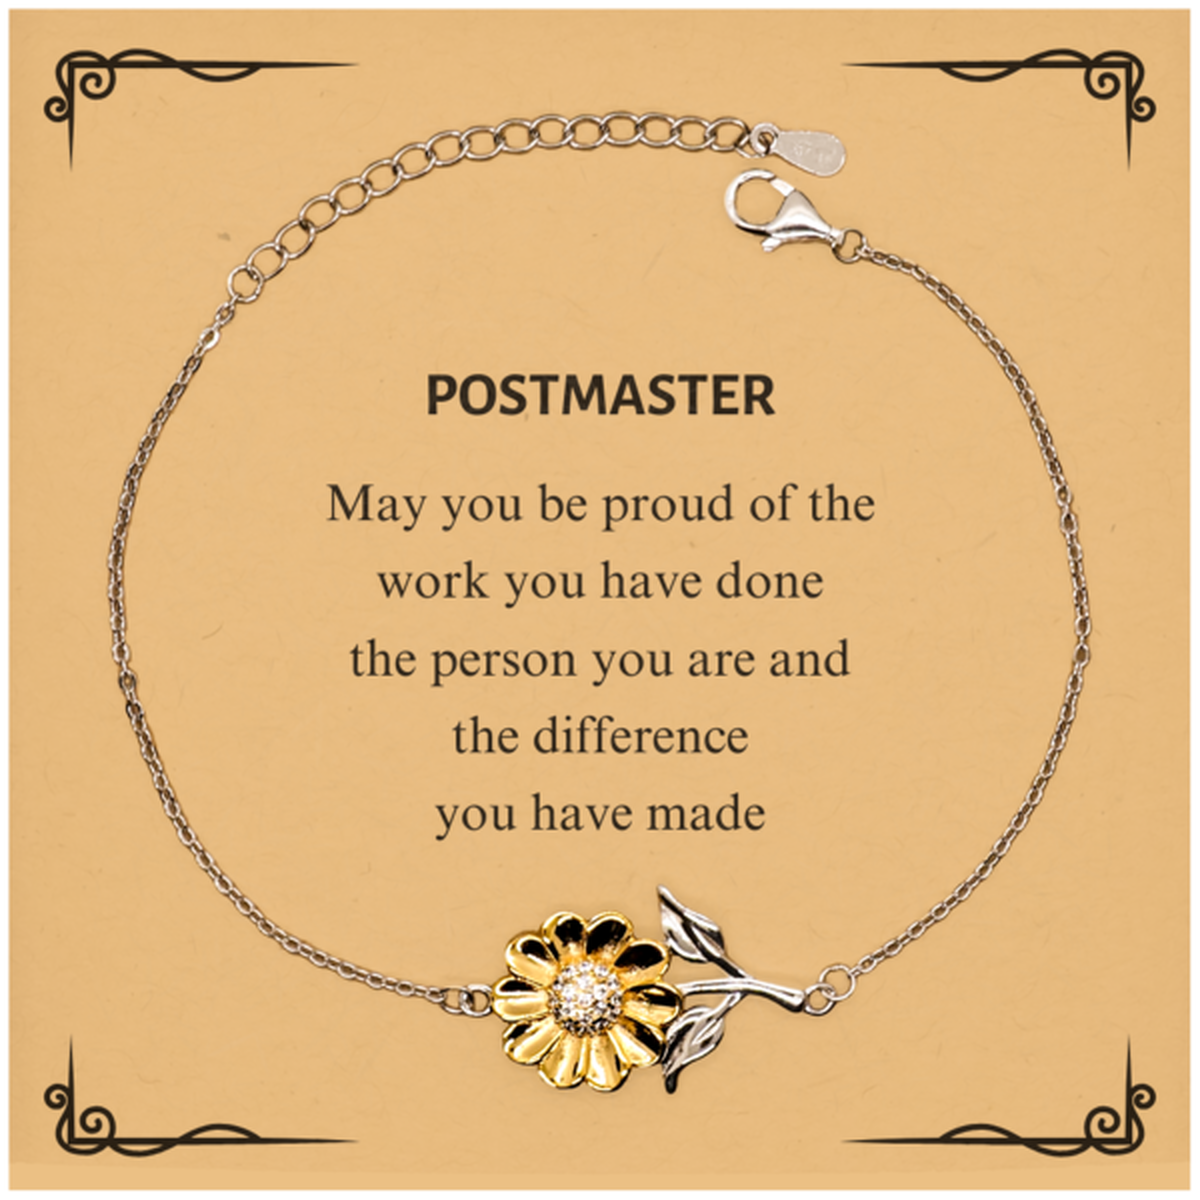 Postmaster May you be proud of the work you have done, Retirement Postmaster Sunflower Bracelet for Colleague Appreciation Gifts Amazing for Postmaster